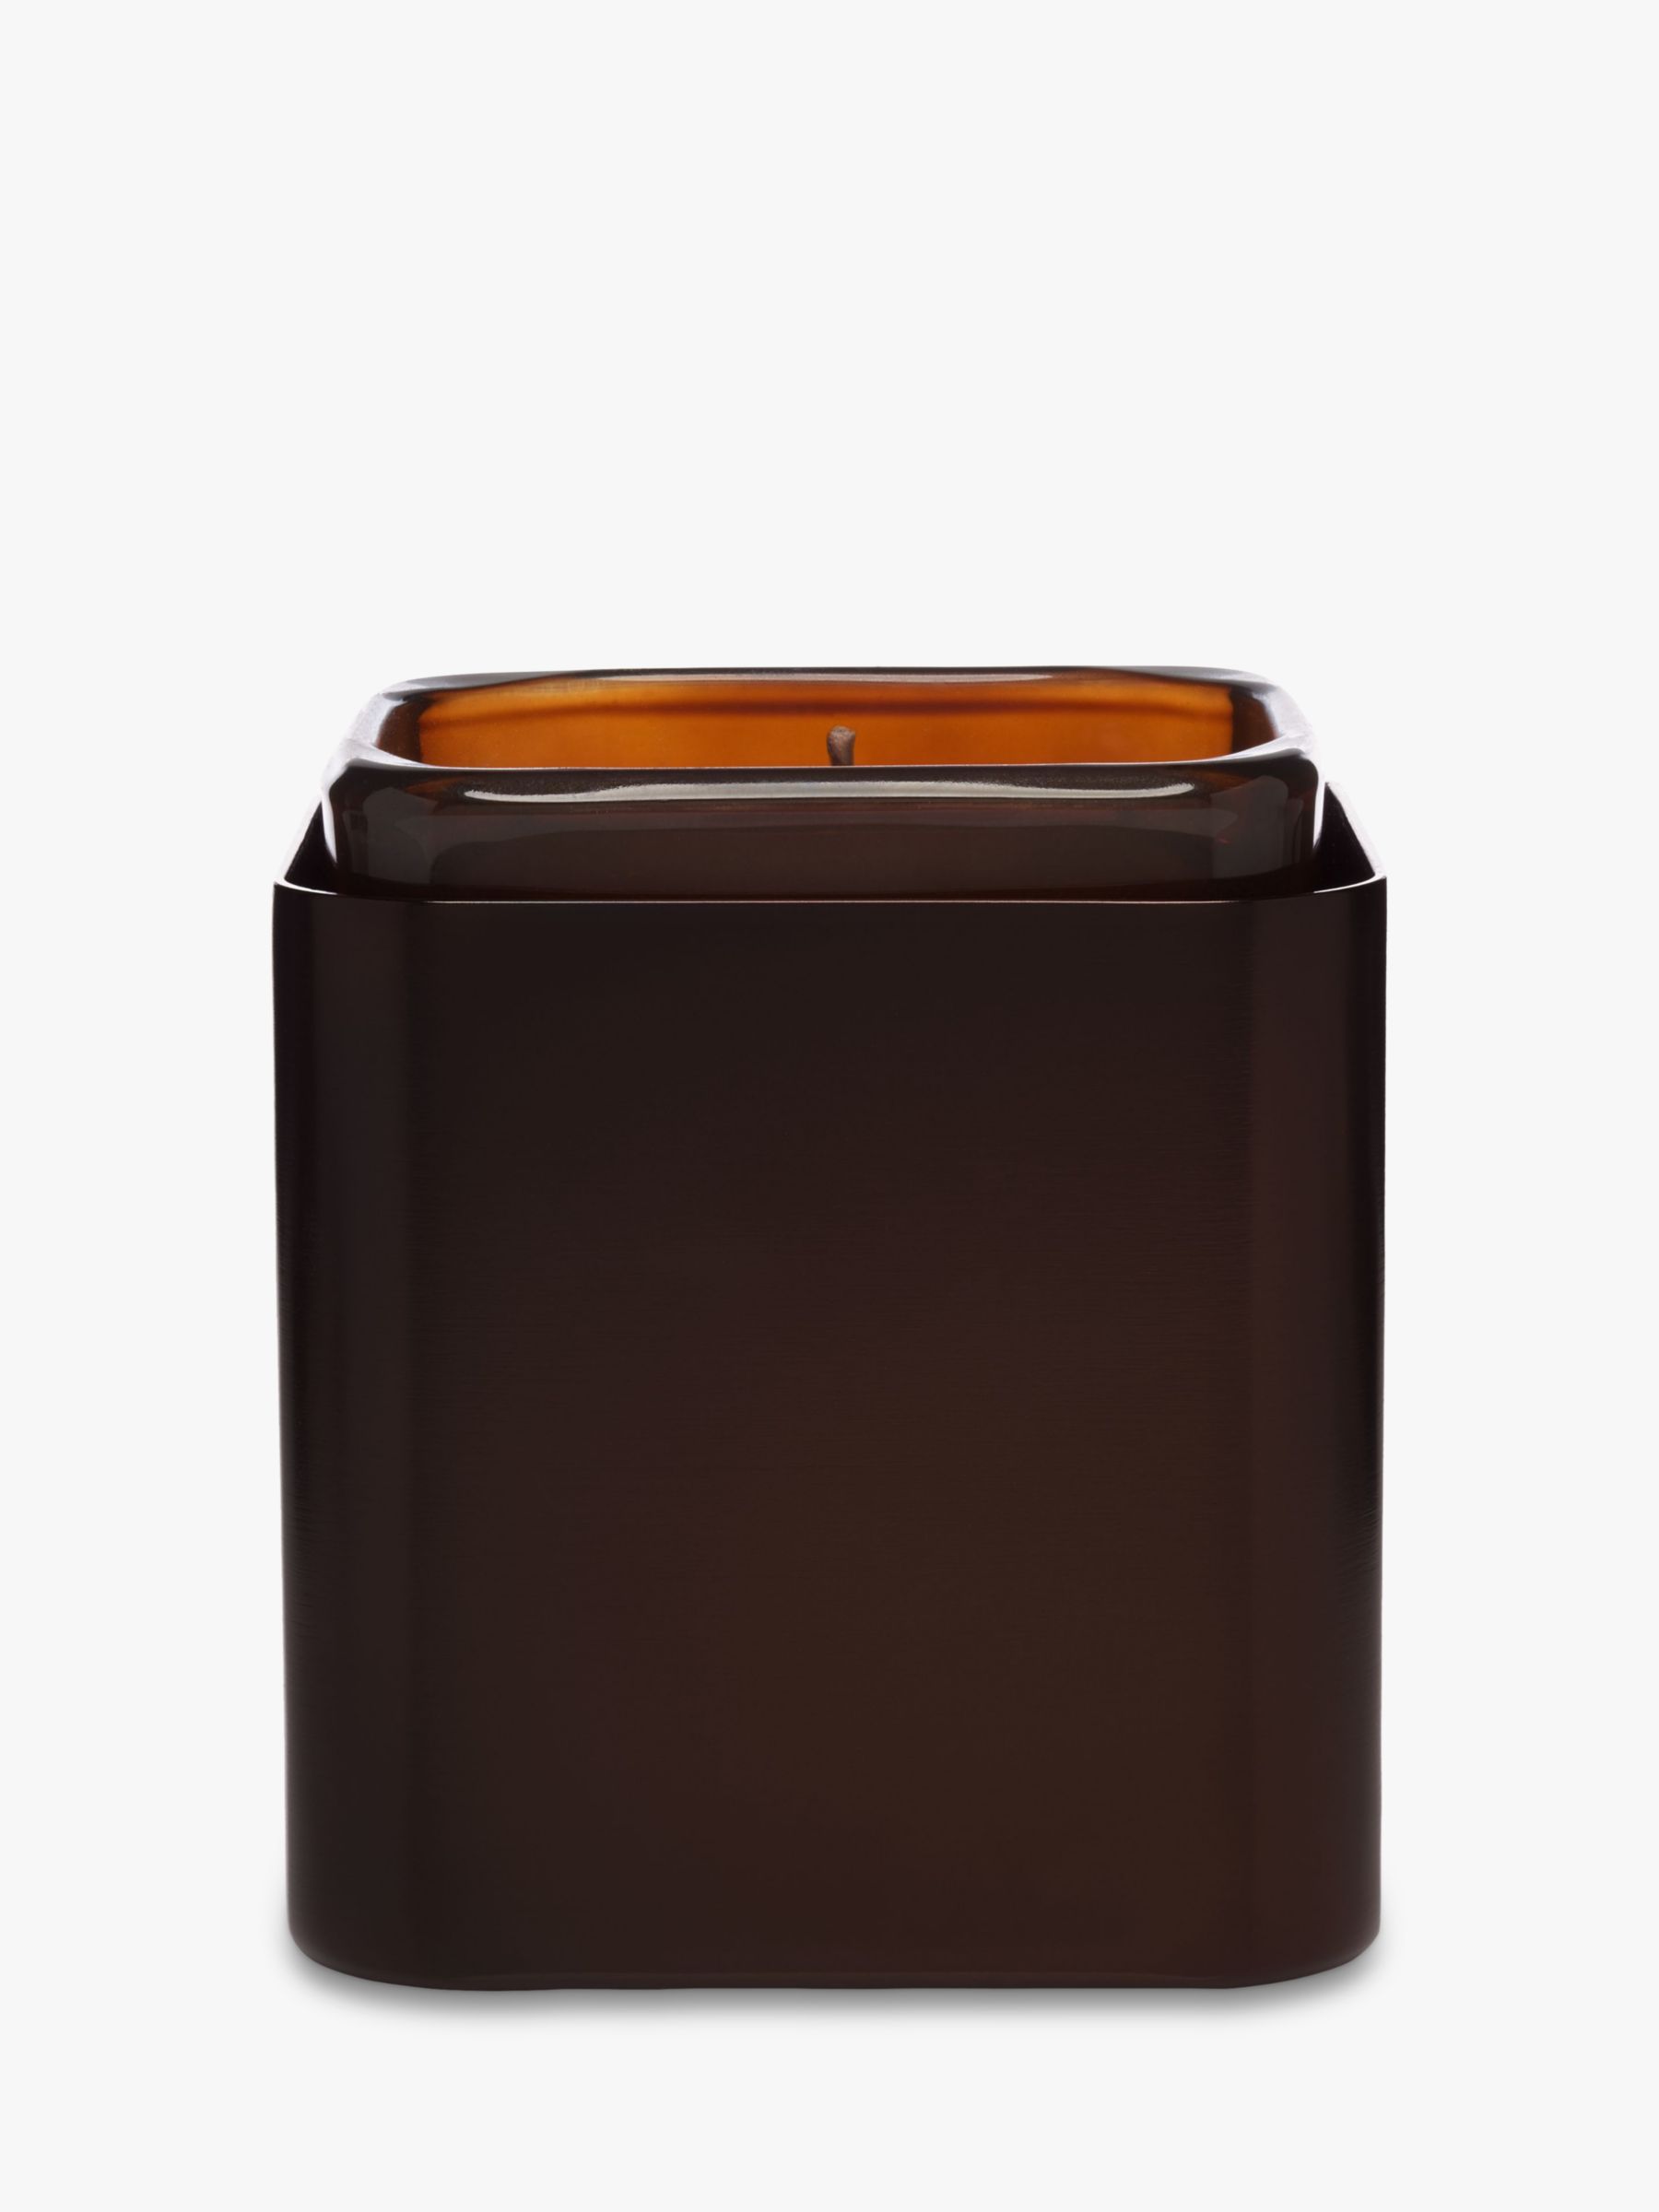 Arriba 40+ imagen tom ford candle cover